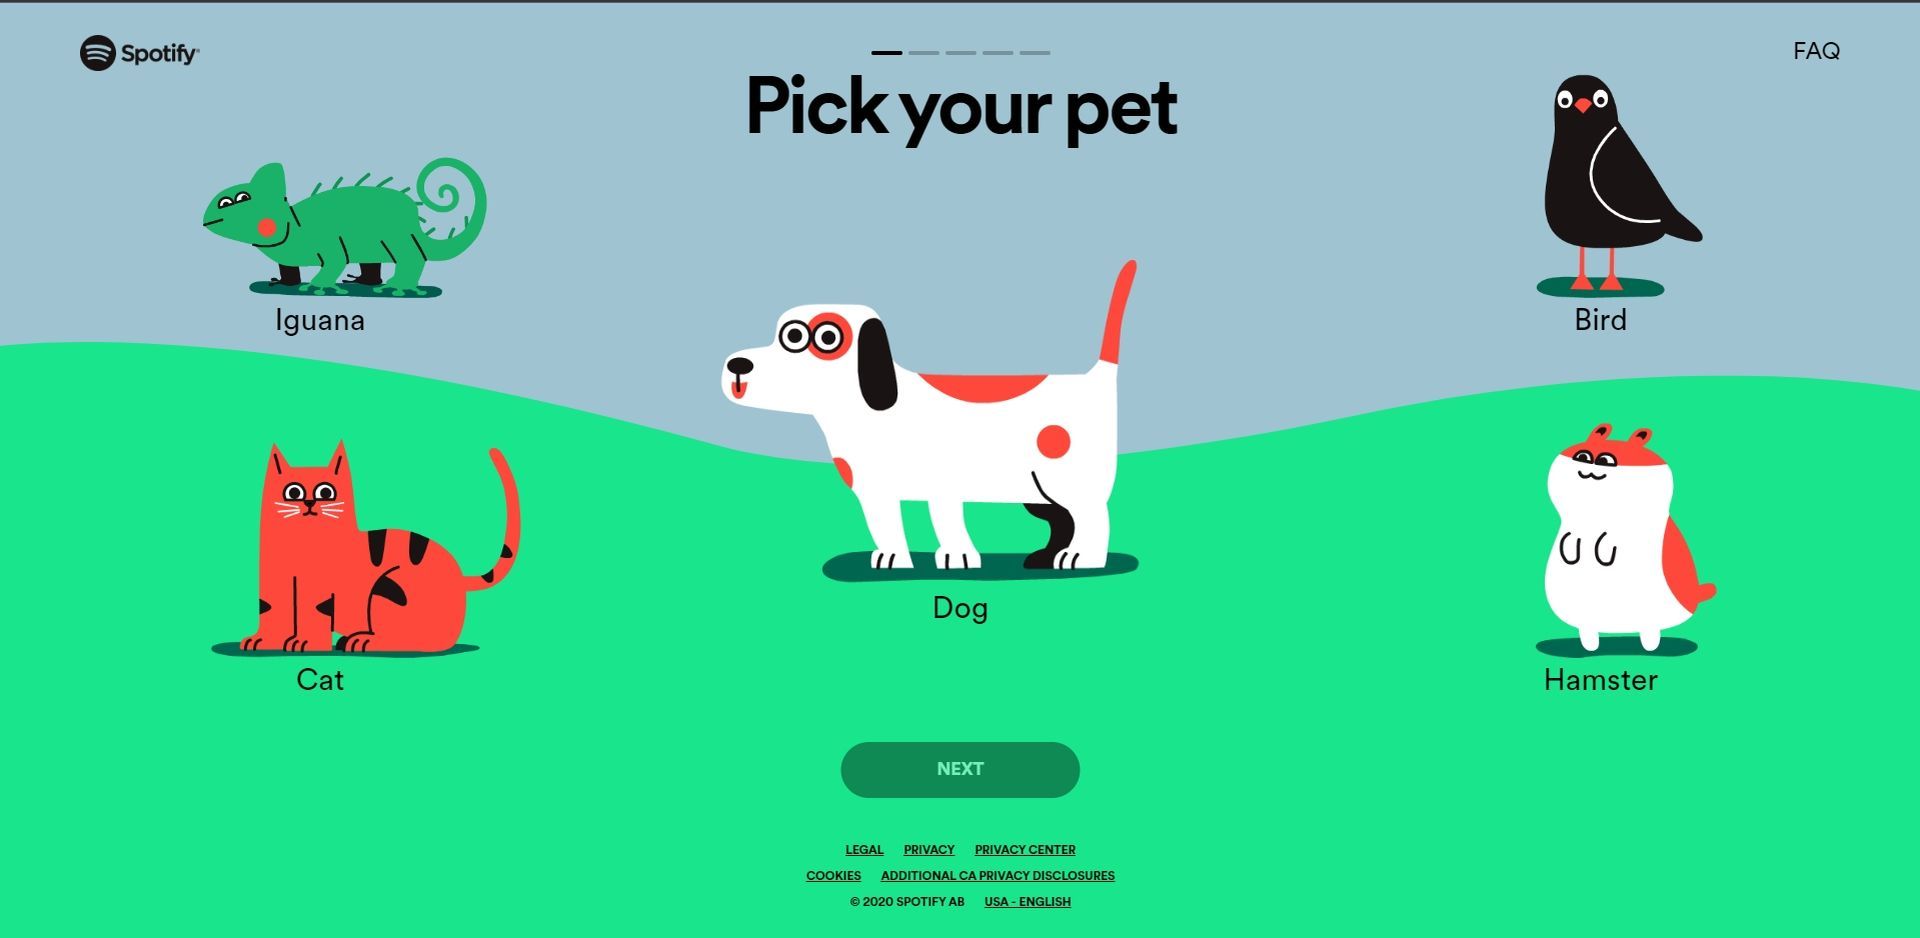 How to get Spotify pets playlist